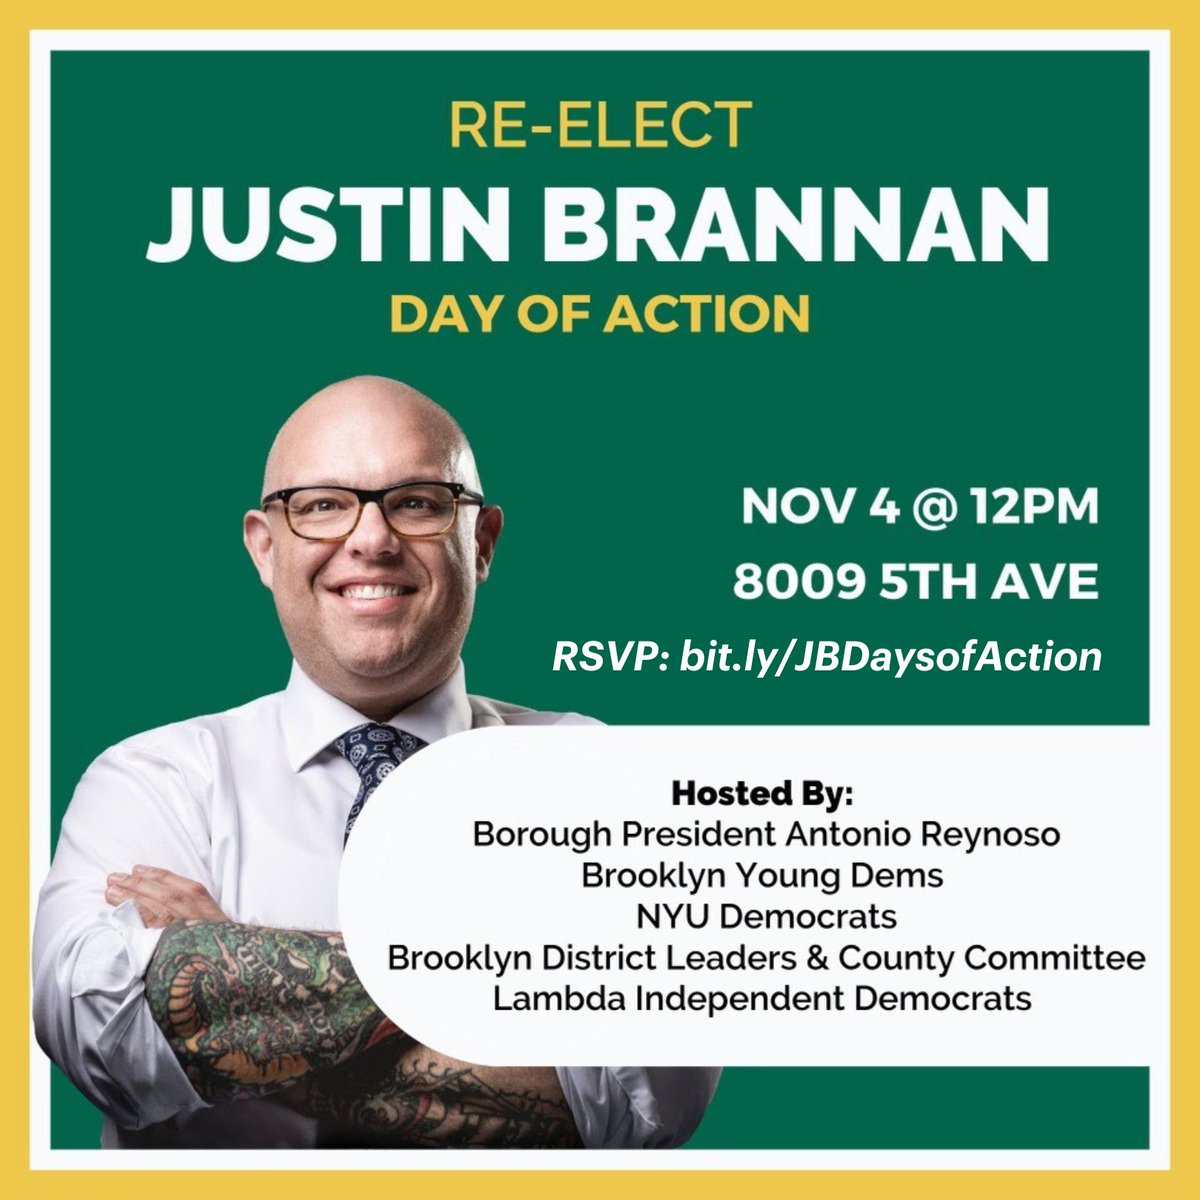 We're down to the wire! Join BYD, @ReynosoBrooklyn, @NYUDems, @LIDbrooklyn and other friends as we hit the streets for @JustinBrannan. Election Day is next week, and we need your help to bring this thing home! RSVP: bit.ly/JBDaysofAction